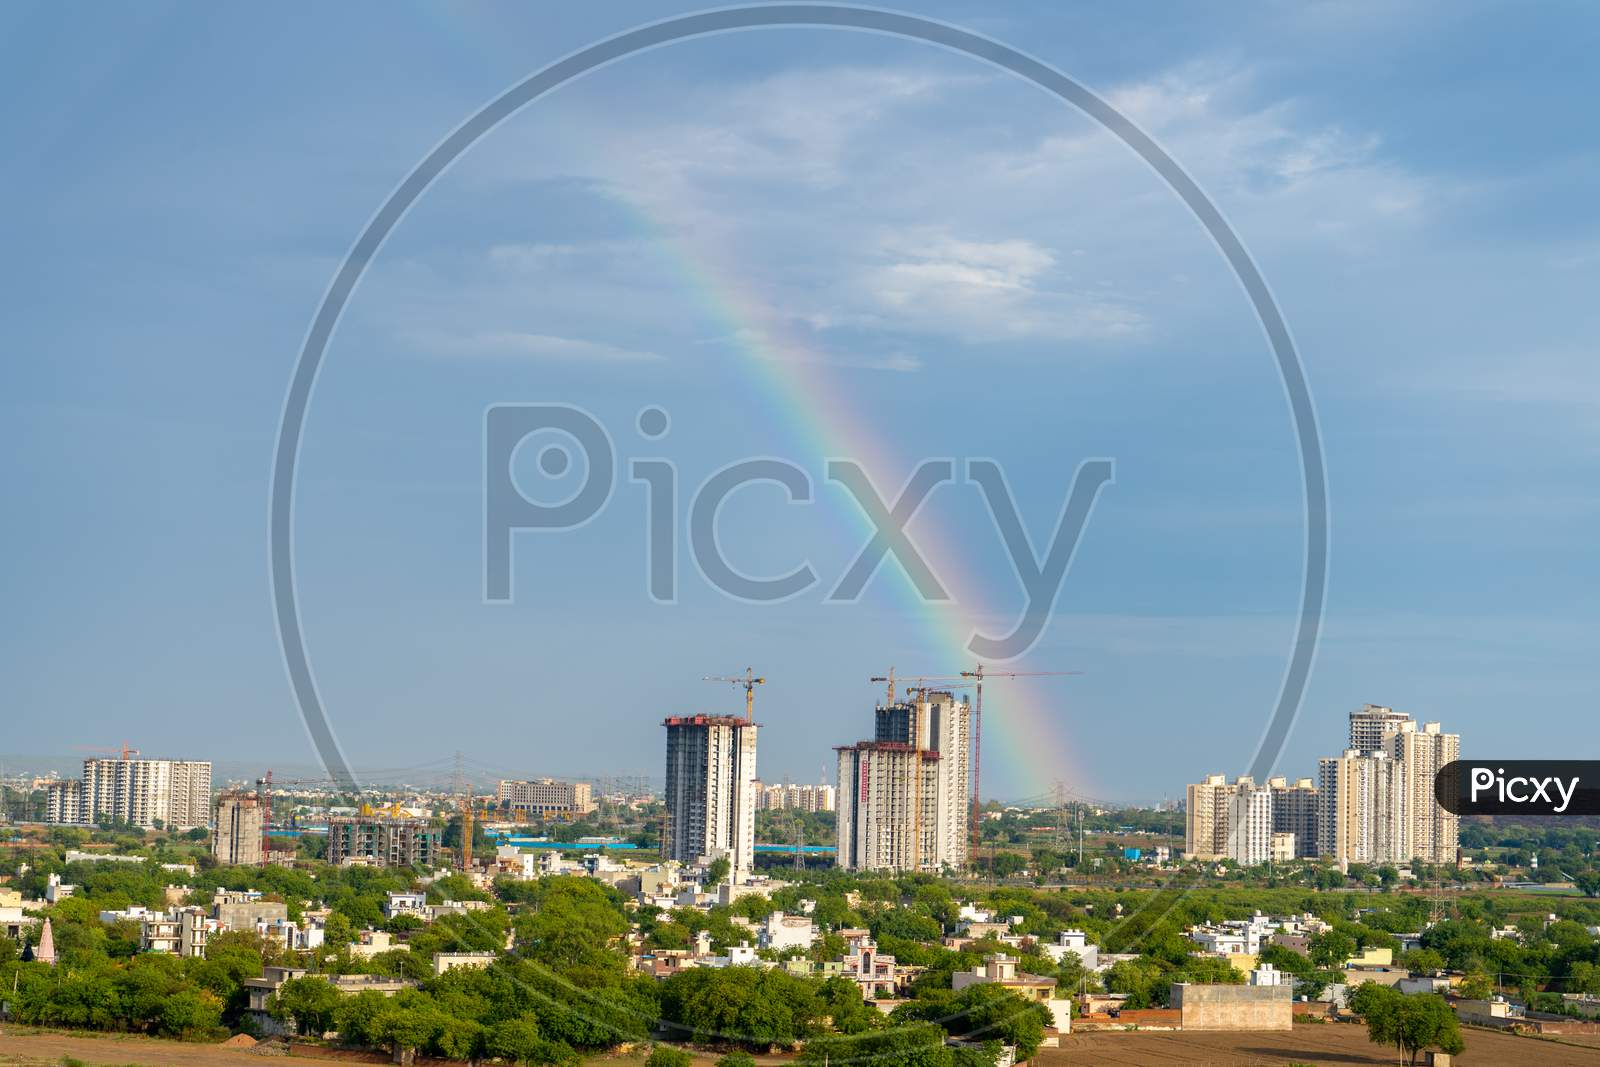 Aerial Cityscape Shot Of Buildings In Gurgaon Delhi Noida With A Rainbow Behind Them On A Monsoon Day